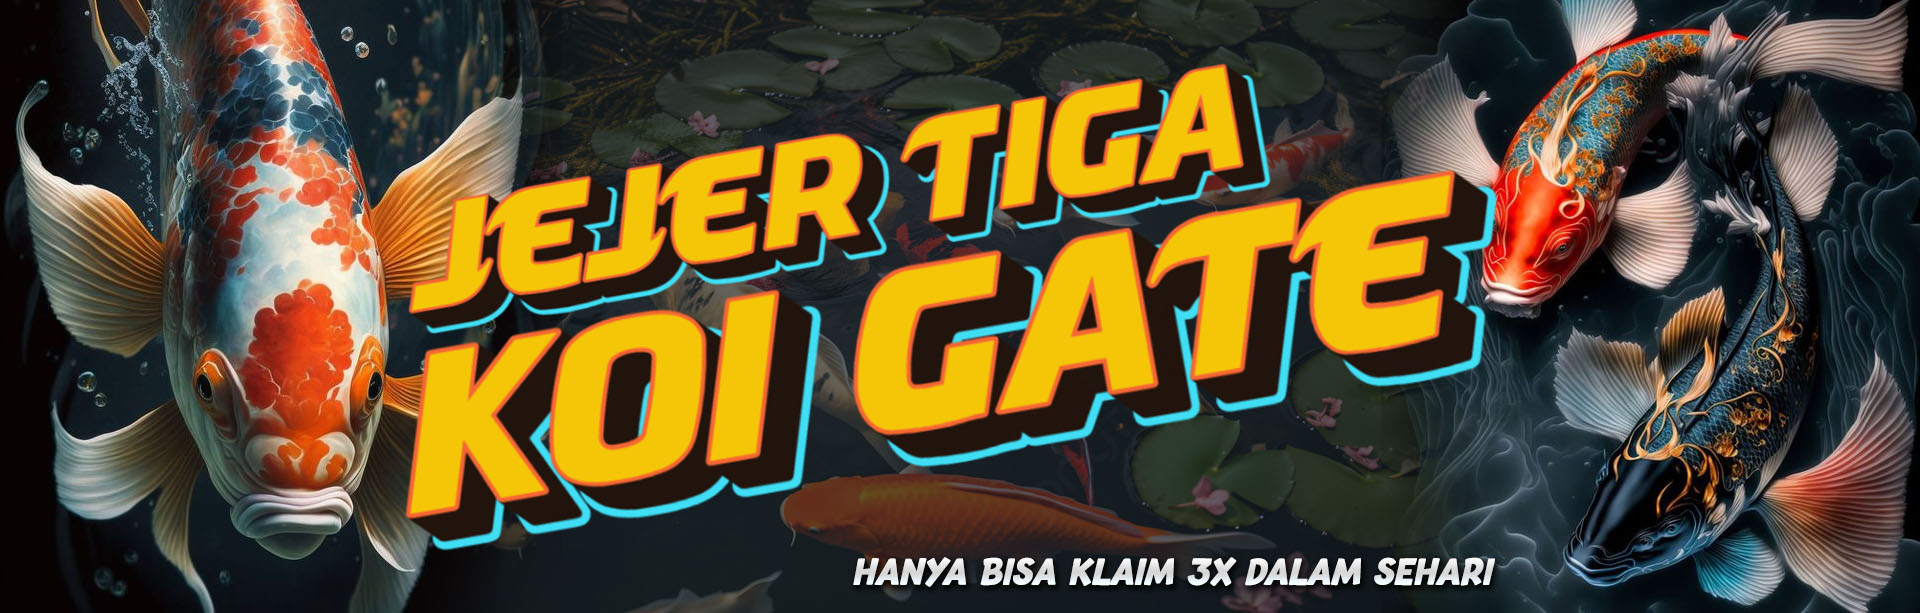 SPECIAL EVENT KOI GATE JEJER 3